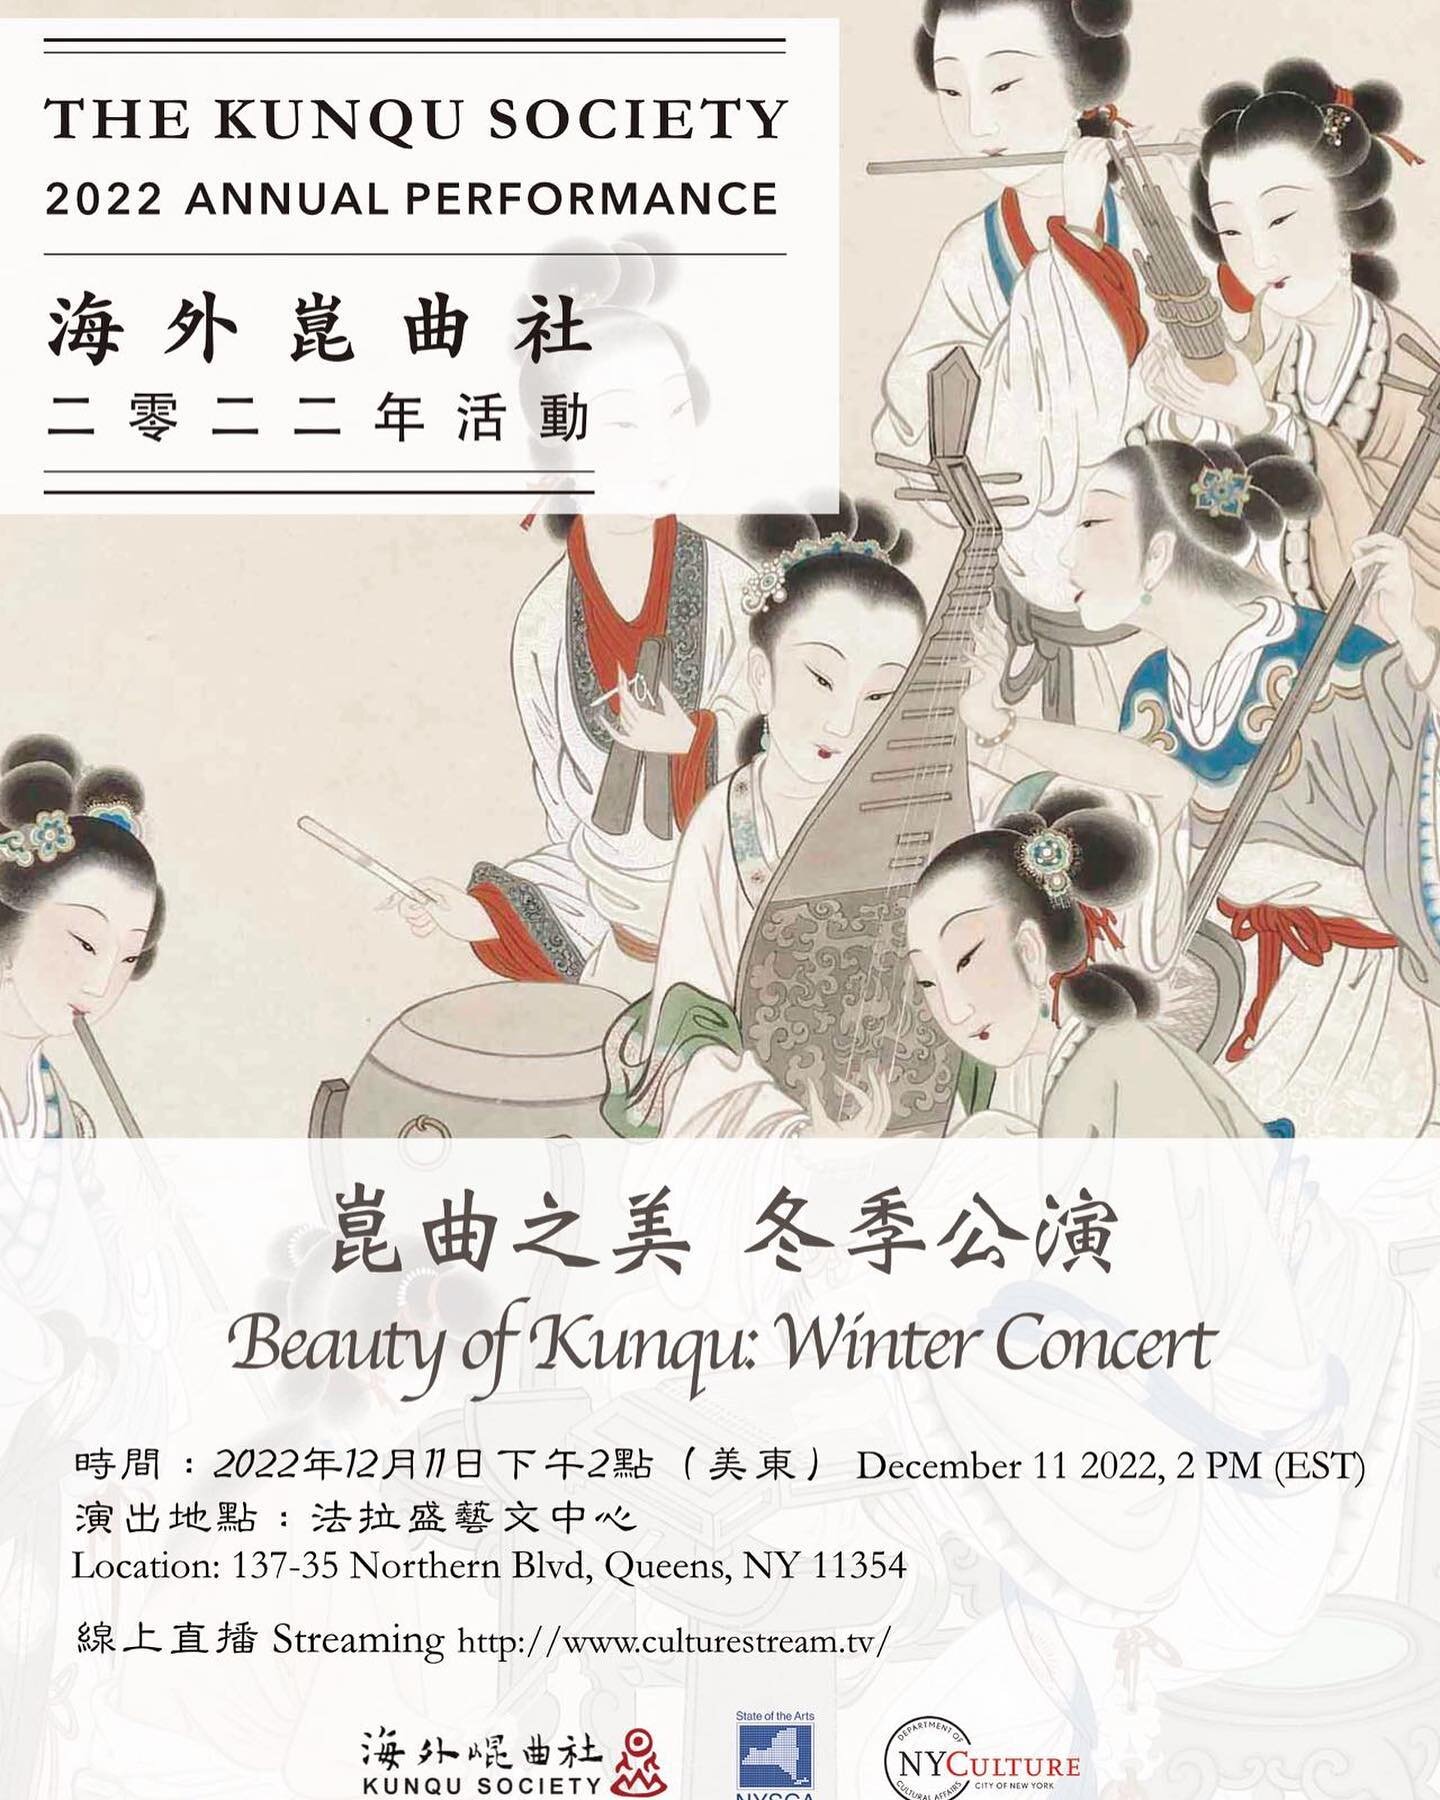 Harvest: Kunqu Live Performance
「崑曲秋聚」

To celebrate the season of harvest and reunion, the Kunqu Society presents a live performance of three plays, featuring its resident artists and members and marking its return to live stage performance, in cost